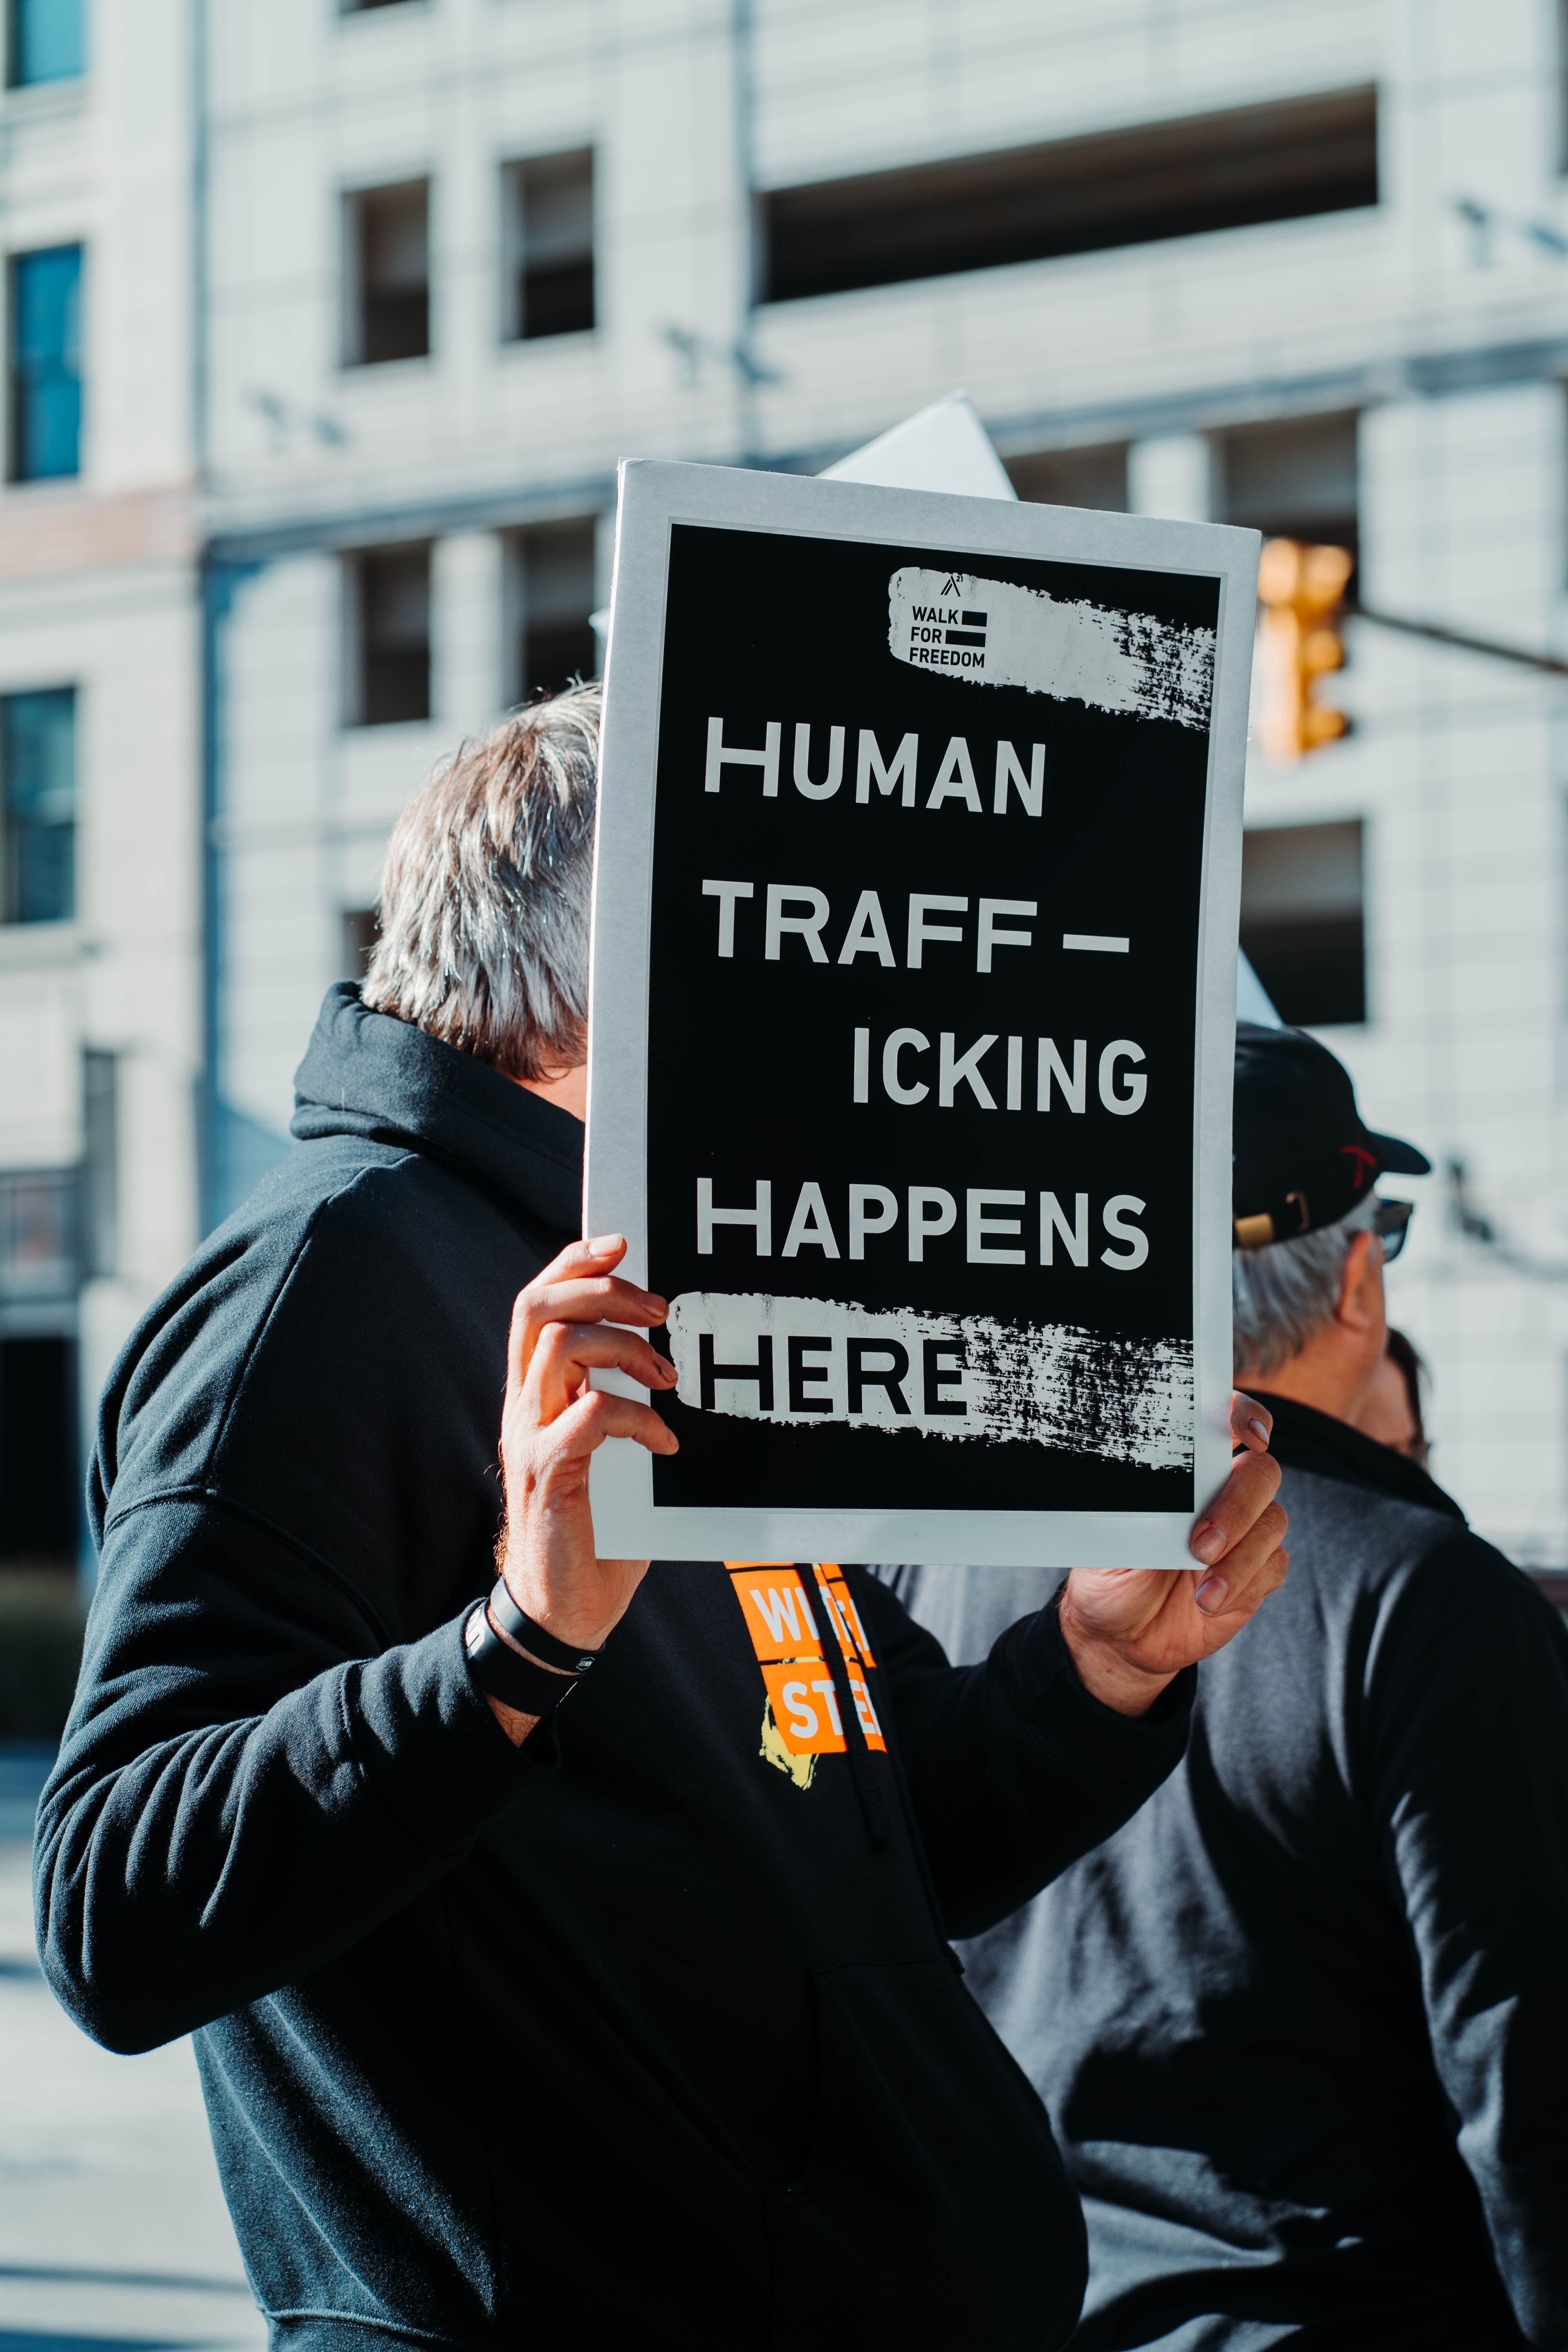 January is Human Trafficking Awareness Month - Take time to learn more about it.